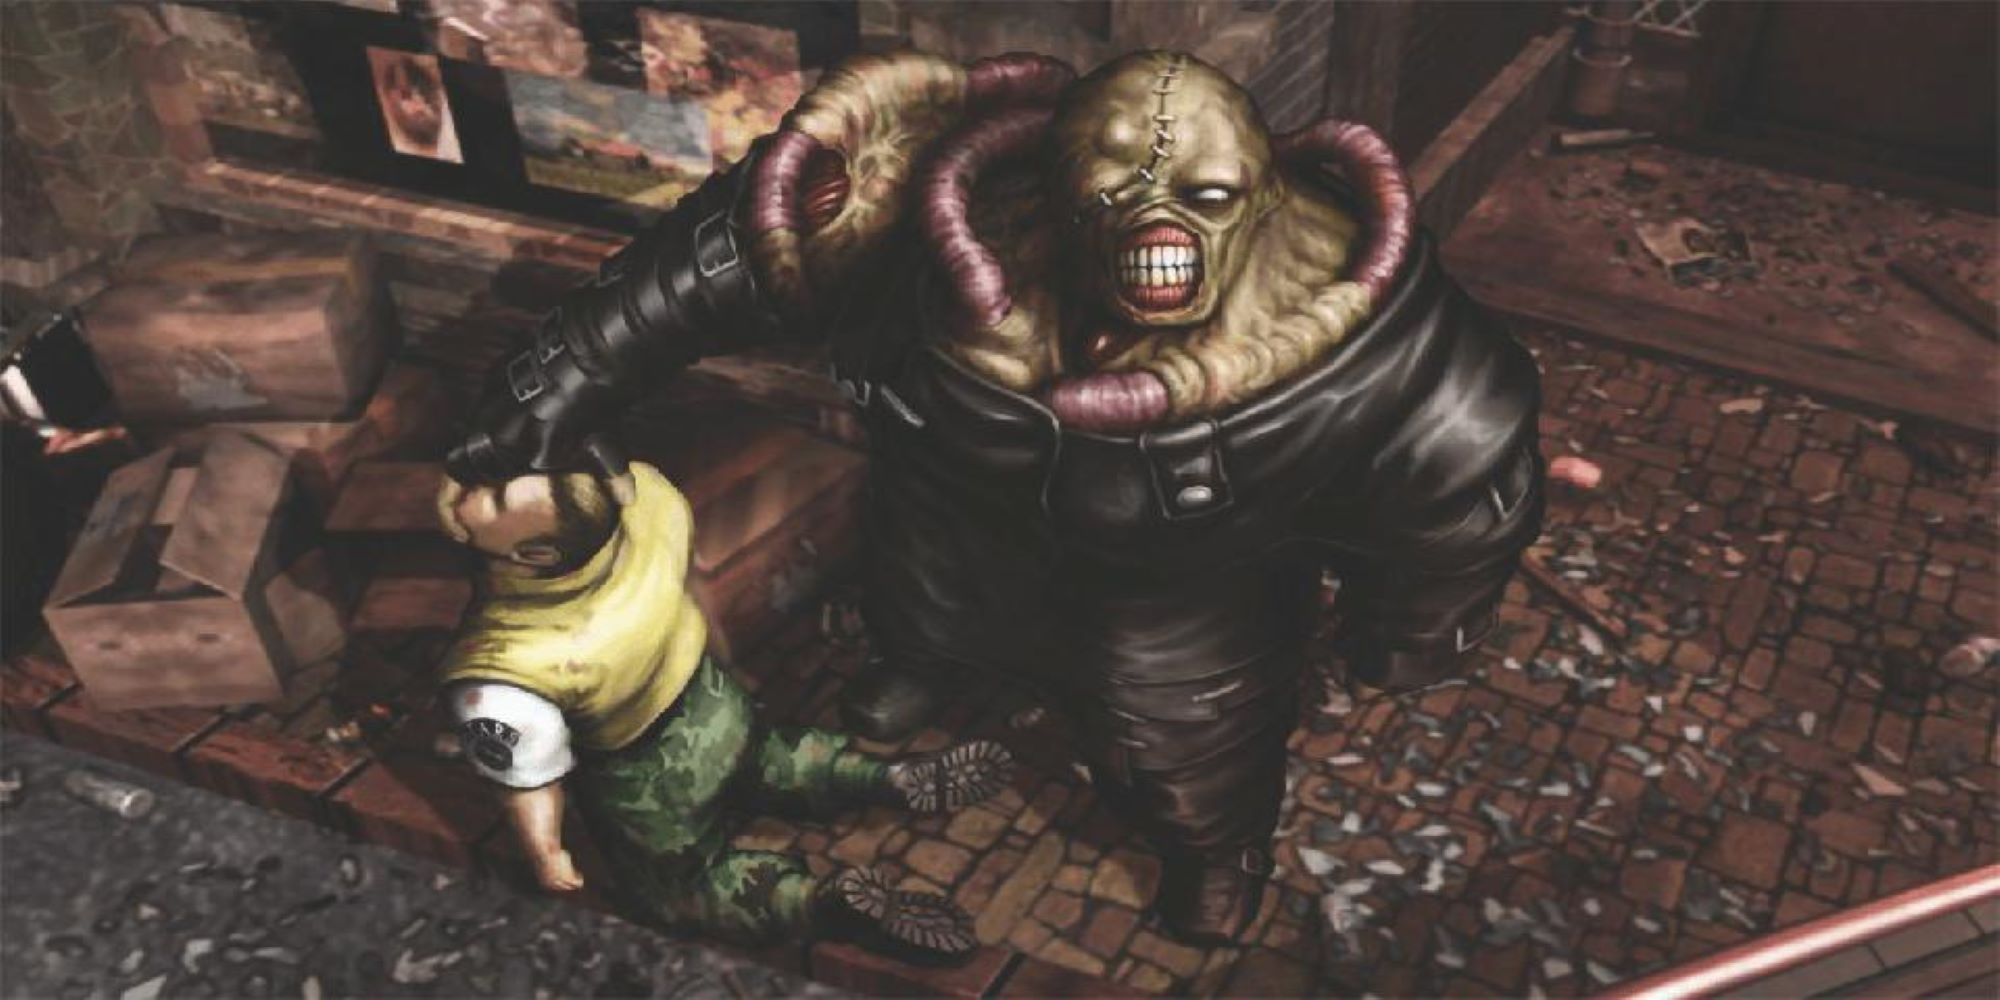 Nemesis from Resident Evil 3 holding a S.T.A.R.S. member and looking at camera